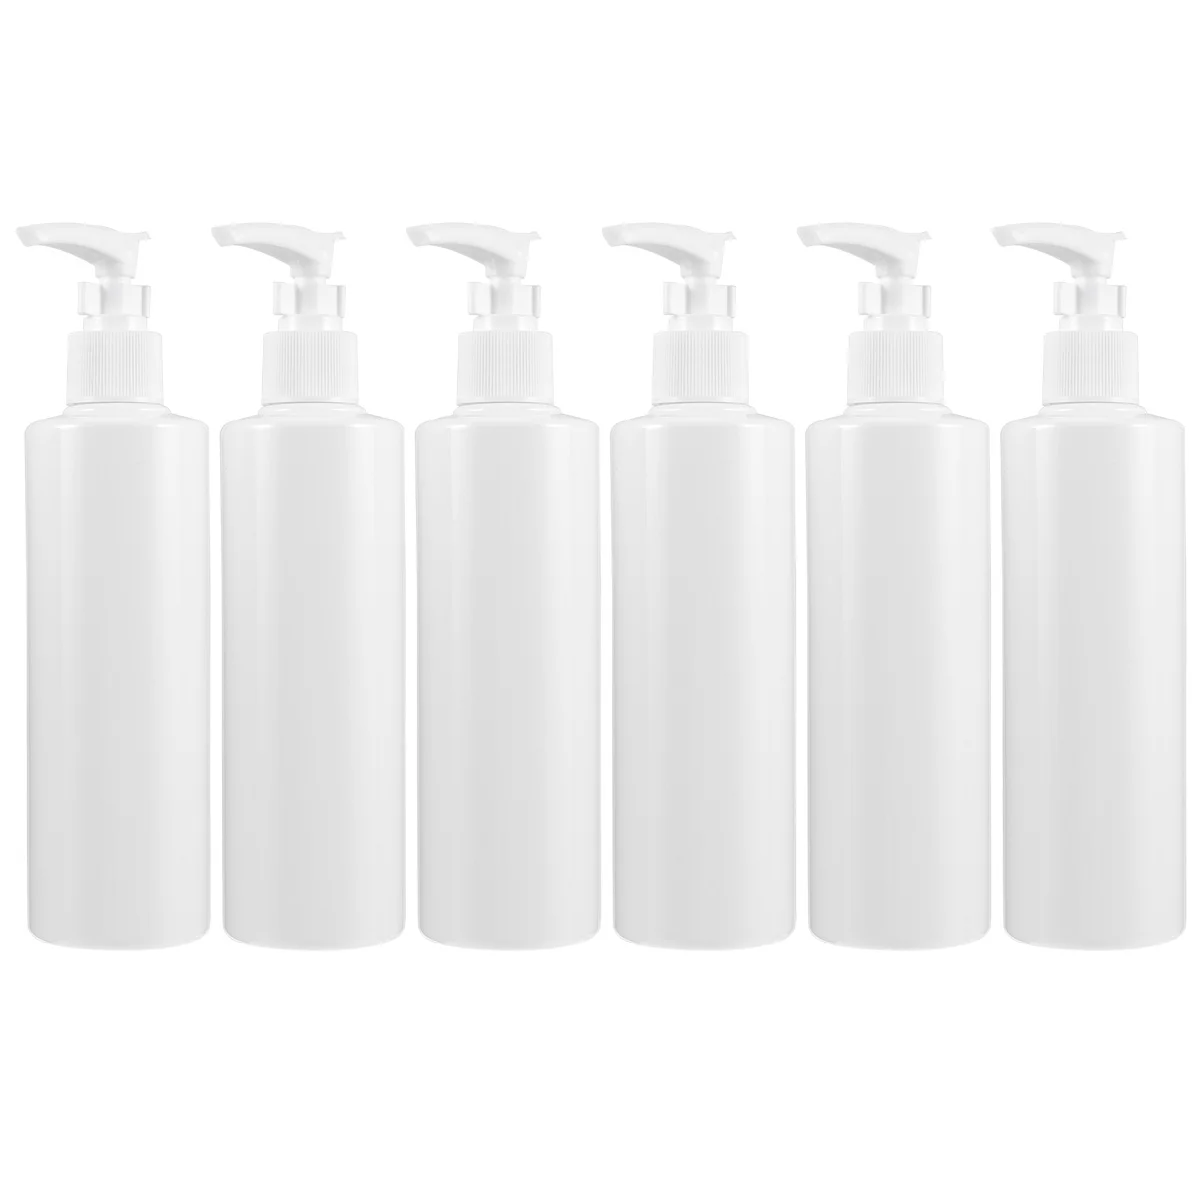 6 PCS Portable Travel Hand Soap Dispenser Shampoo Pump Bottle Toiletries Container 4 pcs silicone travel bottles shampoo portable for toiletries toiletry containers silica gel squeeze